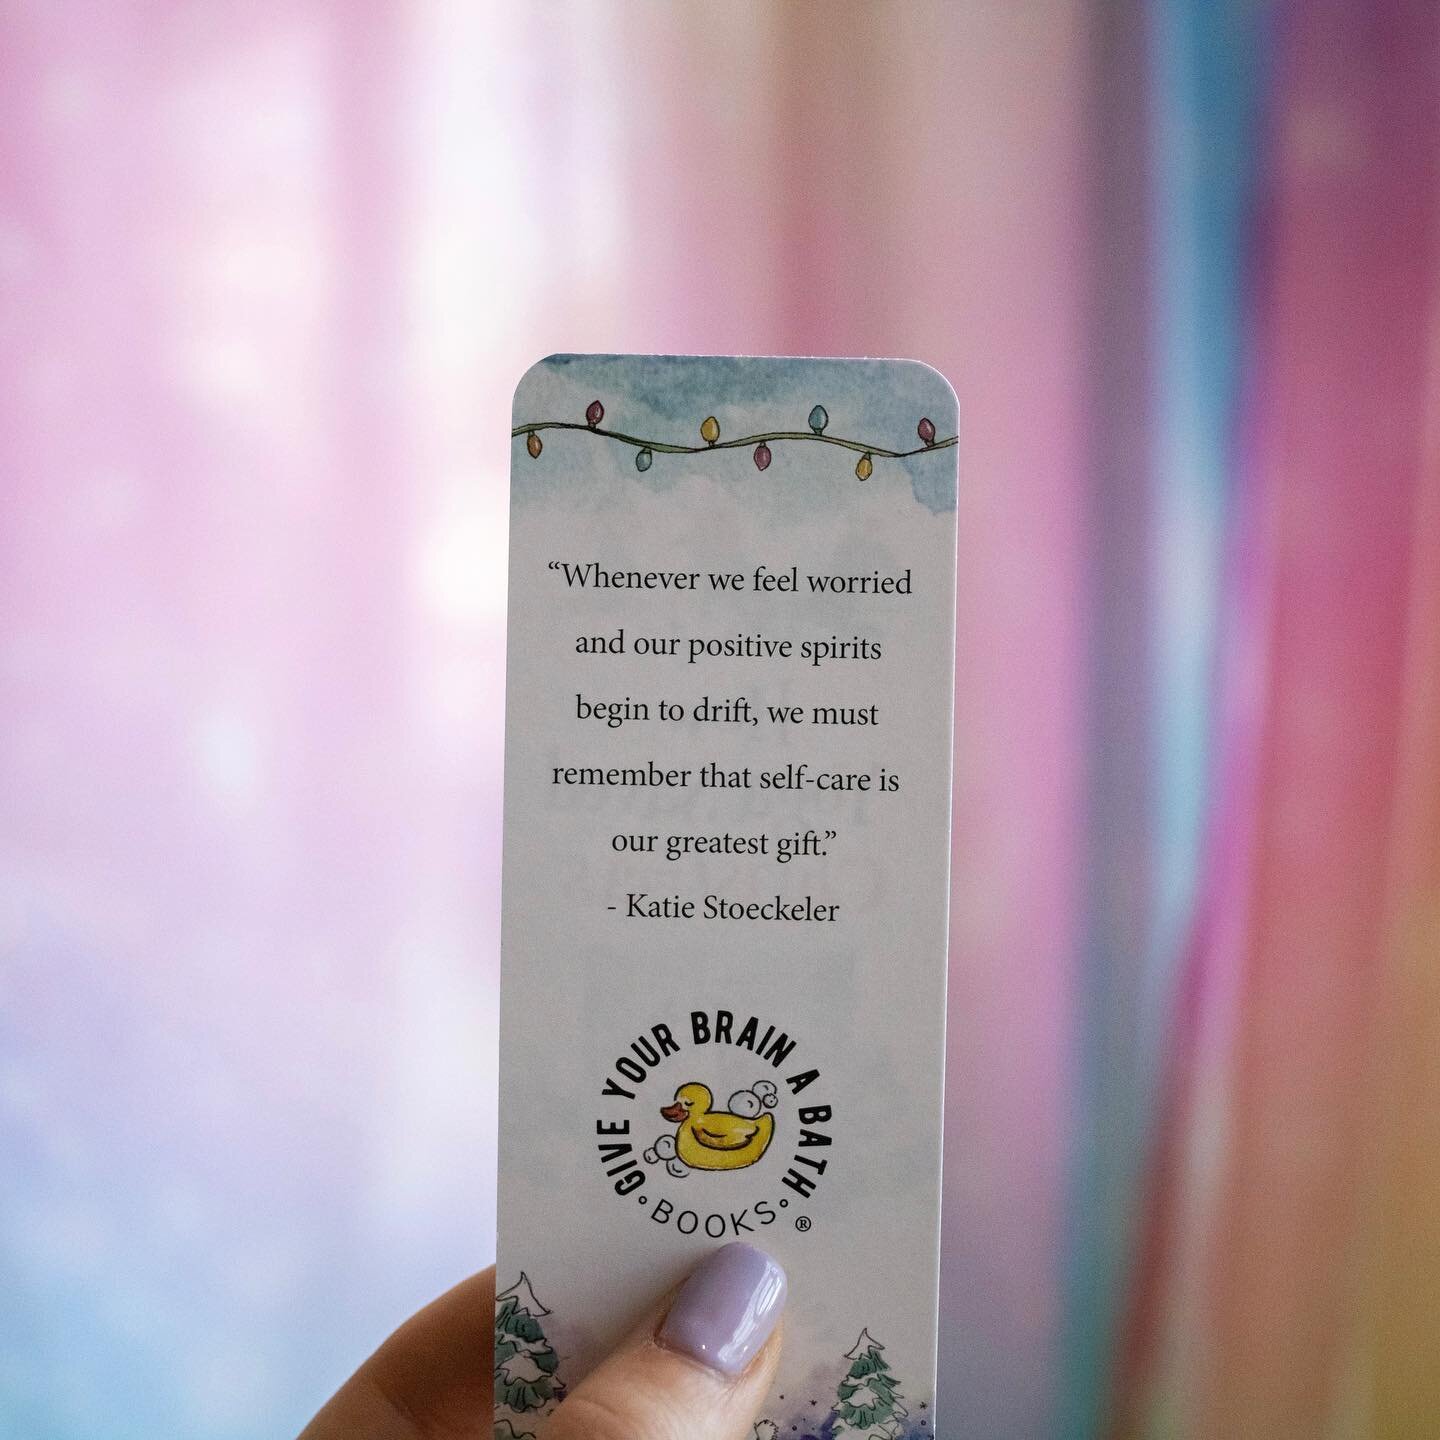 Happy Monday!!! 🫶🏻✨🙂

Incorporating self-care into your daily routine can help you manage stress, lower your risk of illness, and increase your energy.

What are your favorite ways to practice self-care? Let us know in the comments!

www.giveyourb